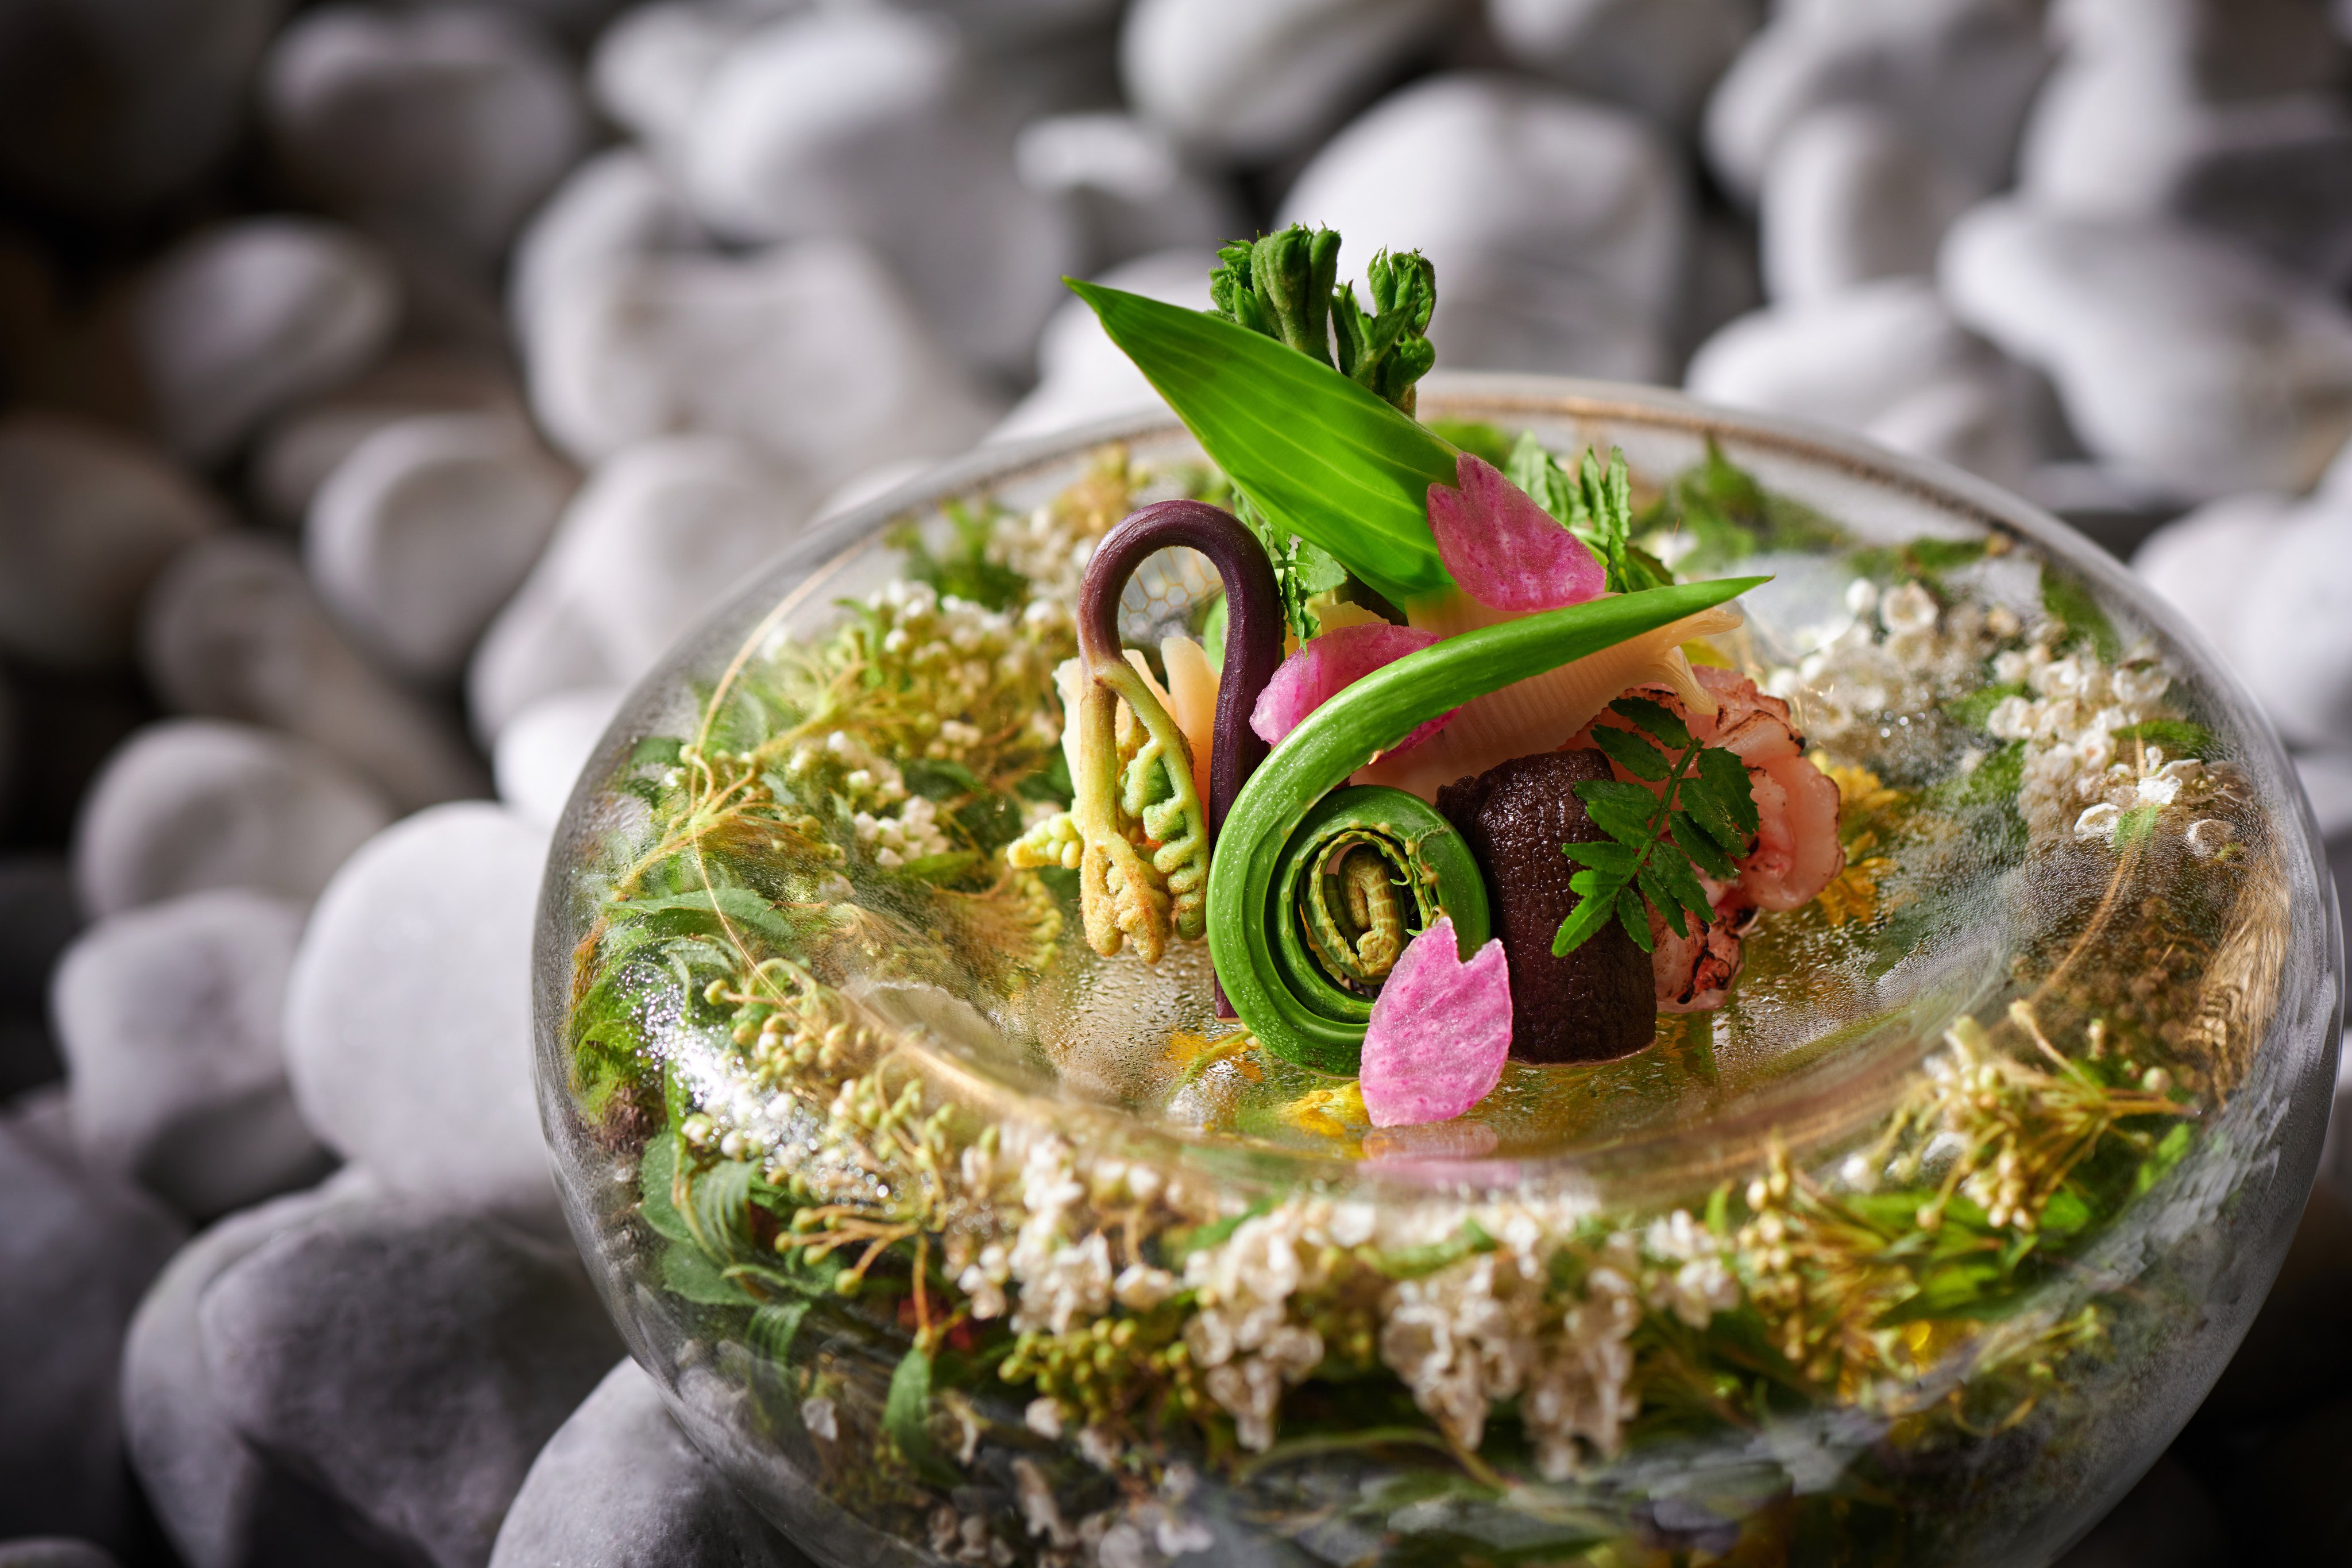 The creative dishes at Mizumi, in Wynn Palace, earned it two Michelin stars in this year’s guide. Photo: Handout